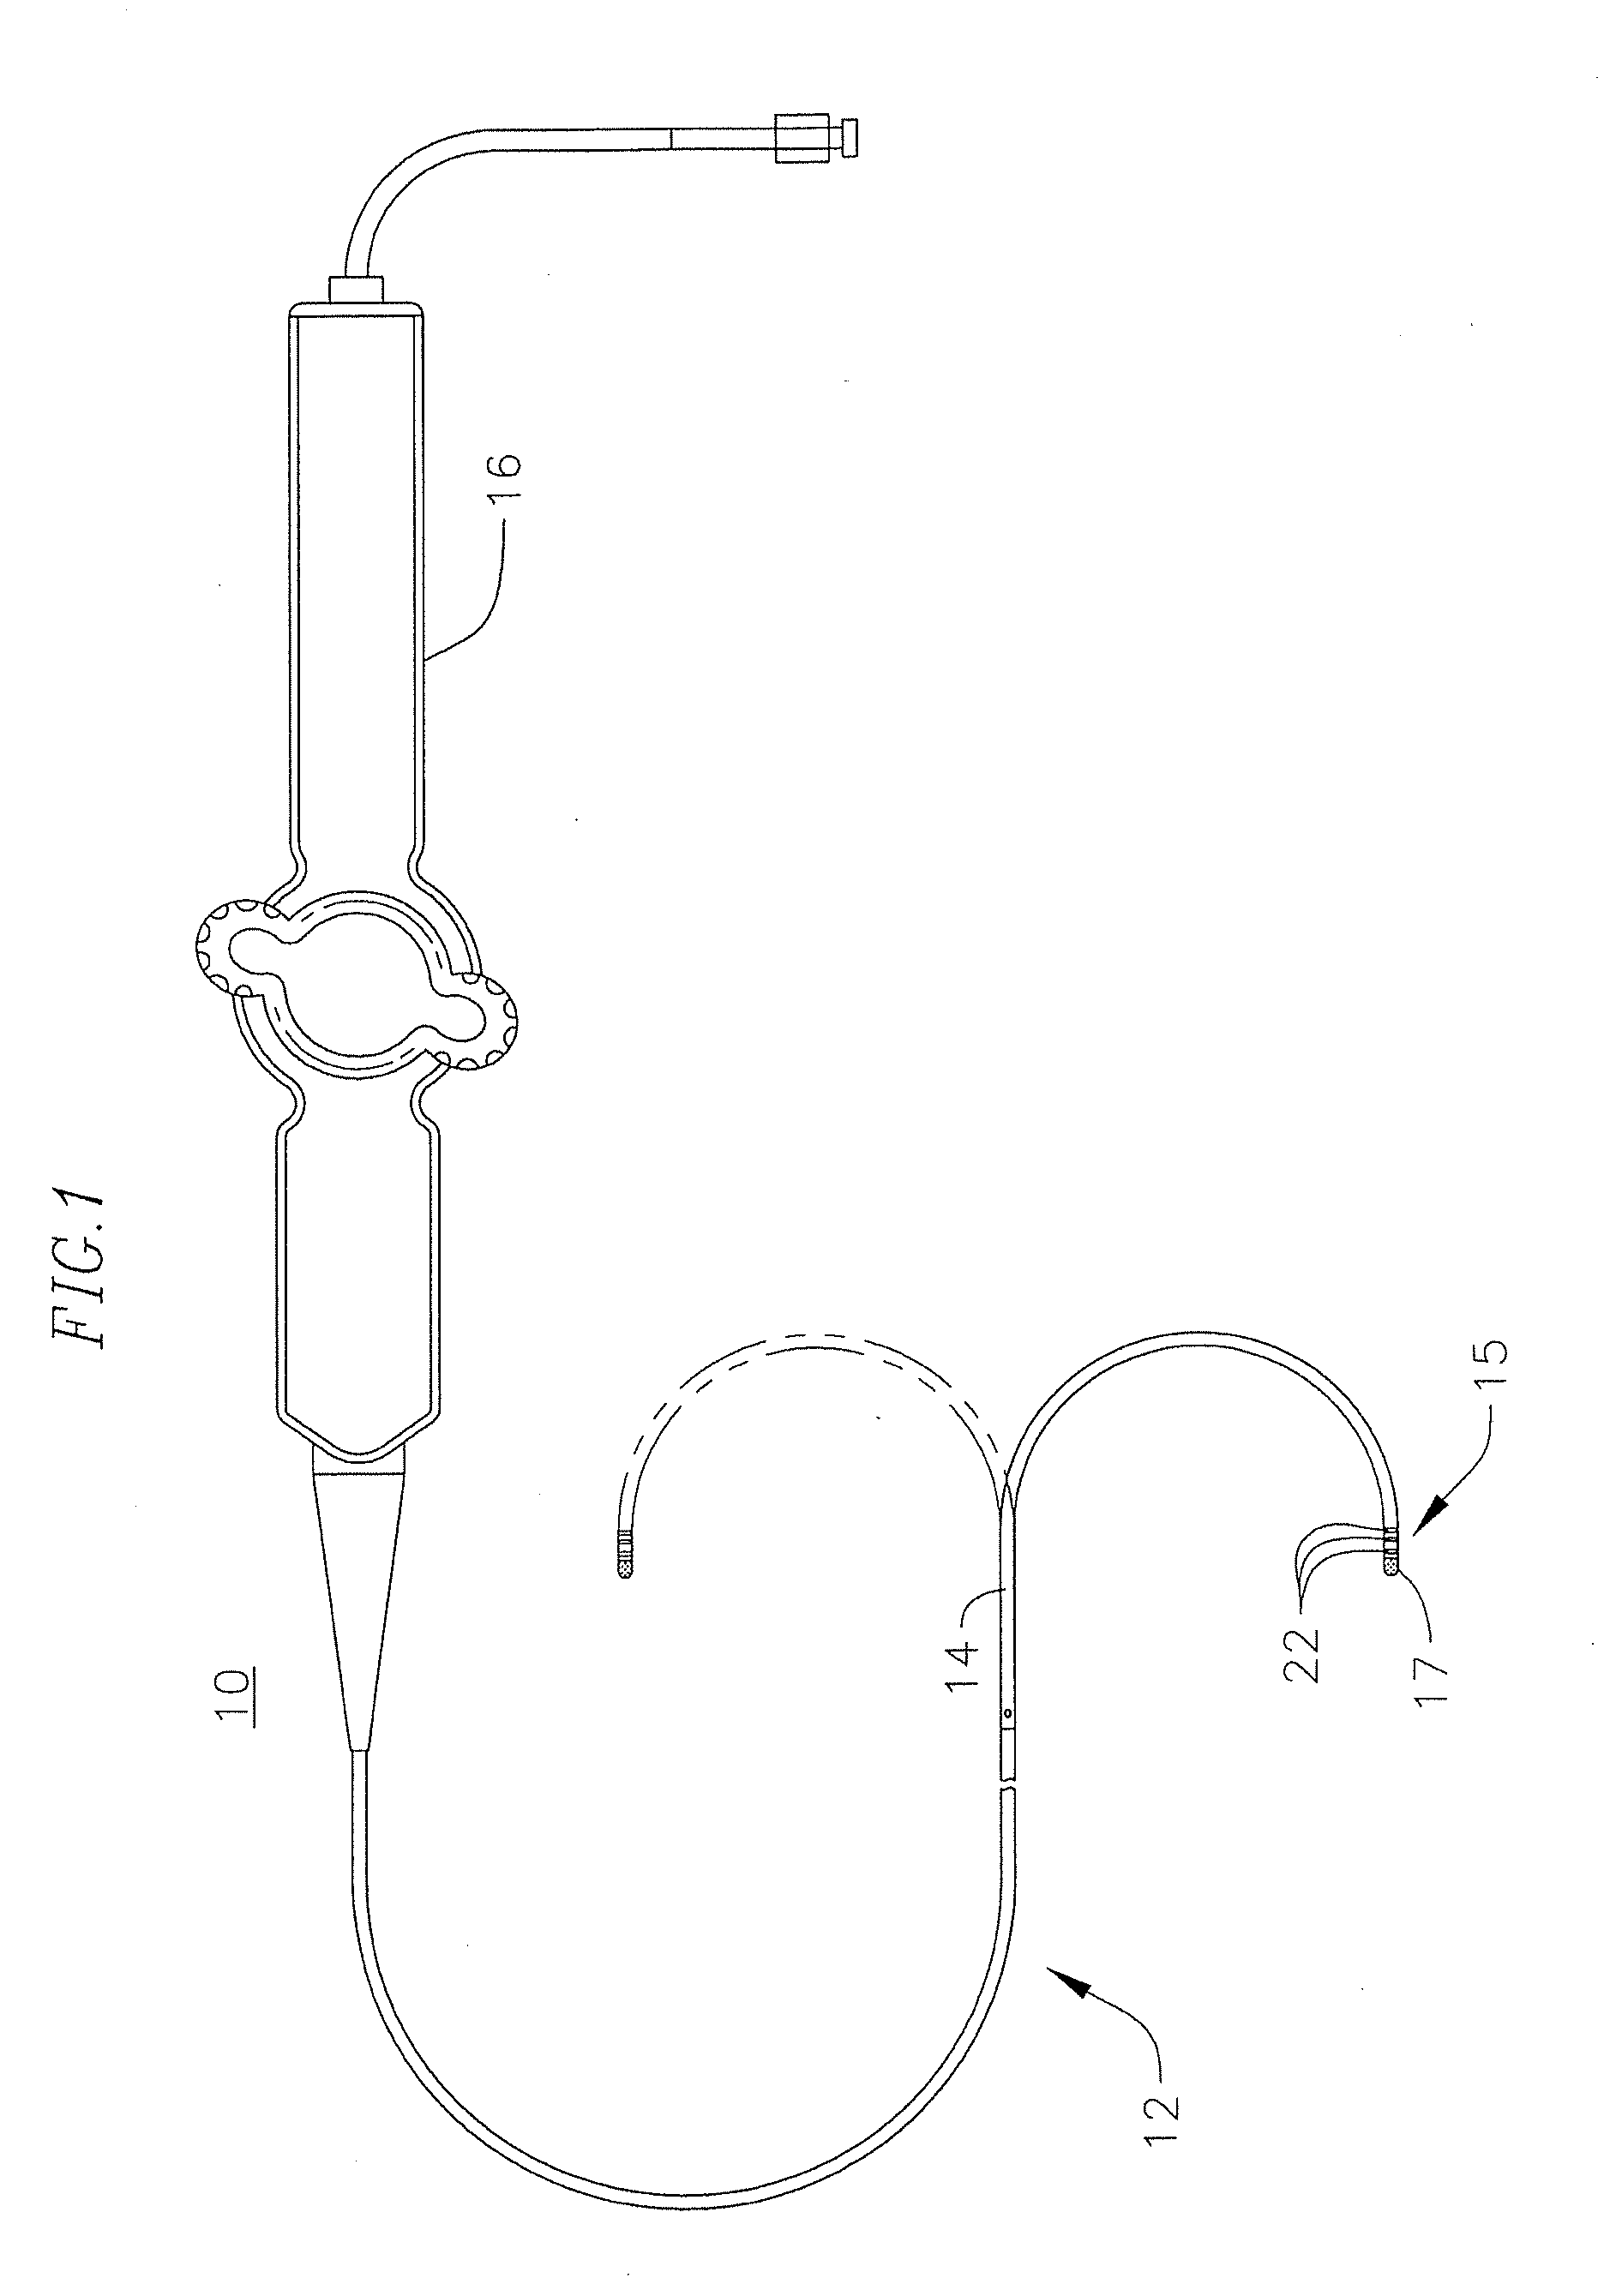 Irrigated ablation catheter with improved fluid flow